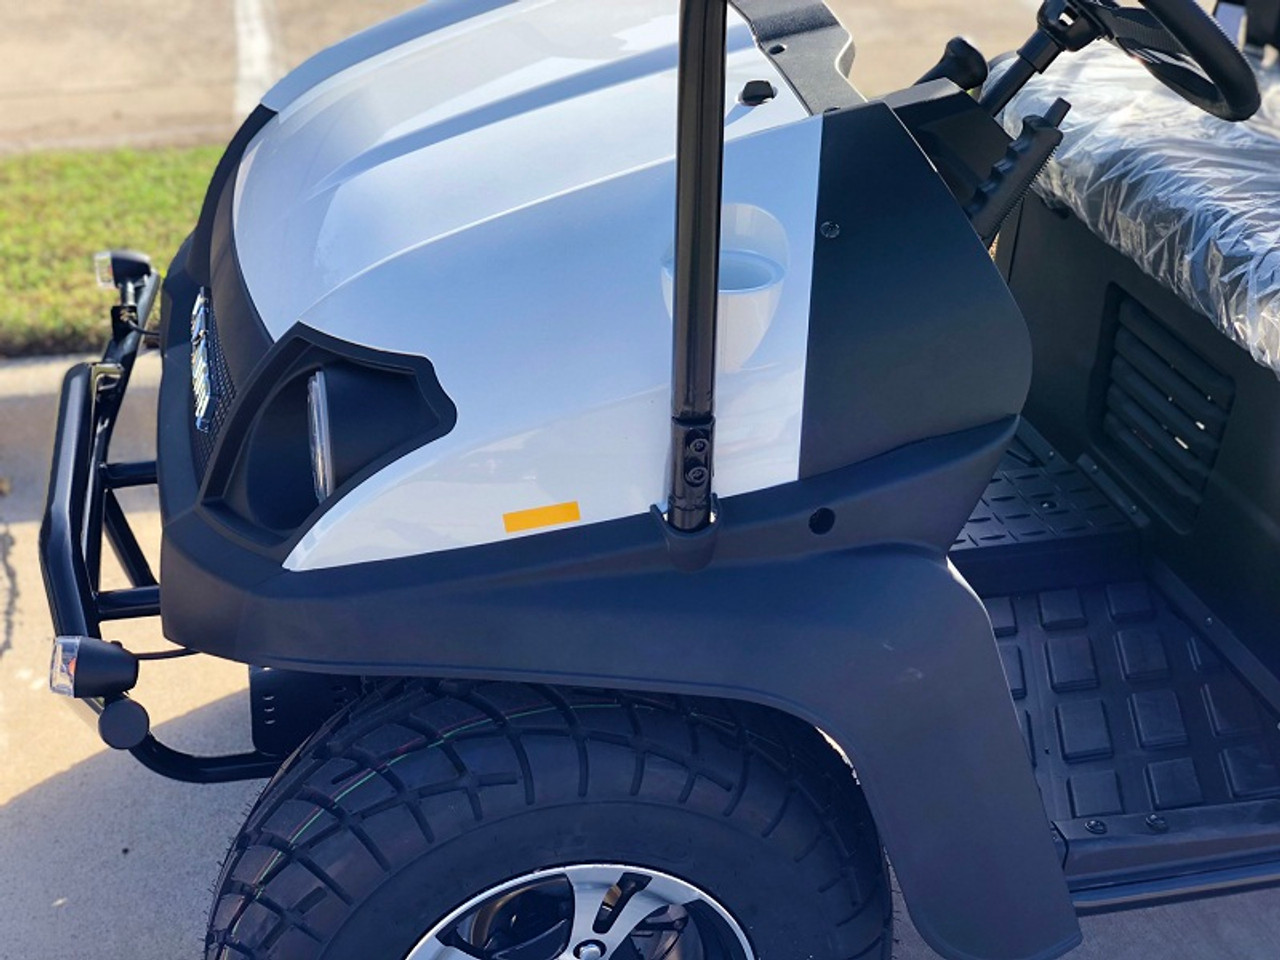 white- Fully Loaded Cazador OUTFITTER 200 Golf Cart 4 Seater Street Legal UTV - Fully Assembled and Tested